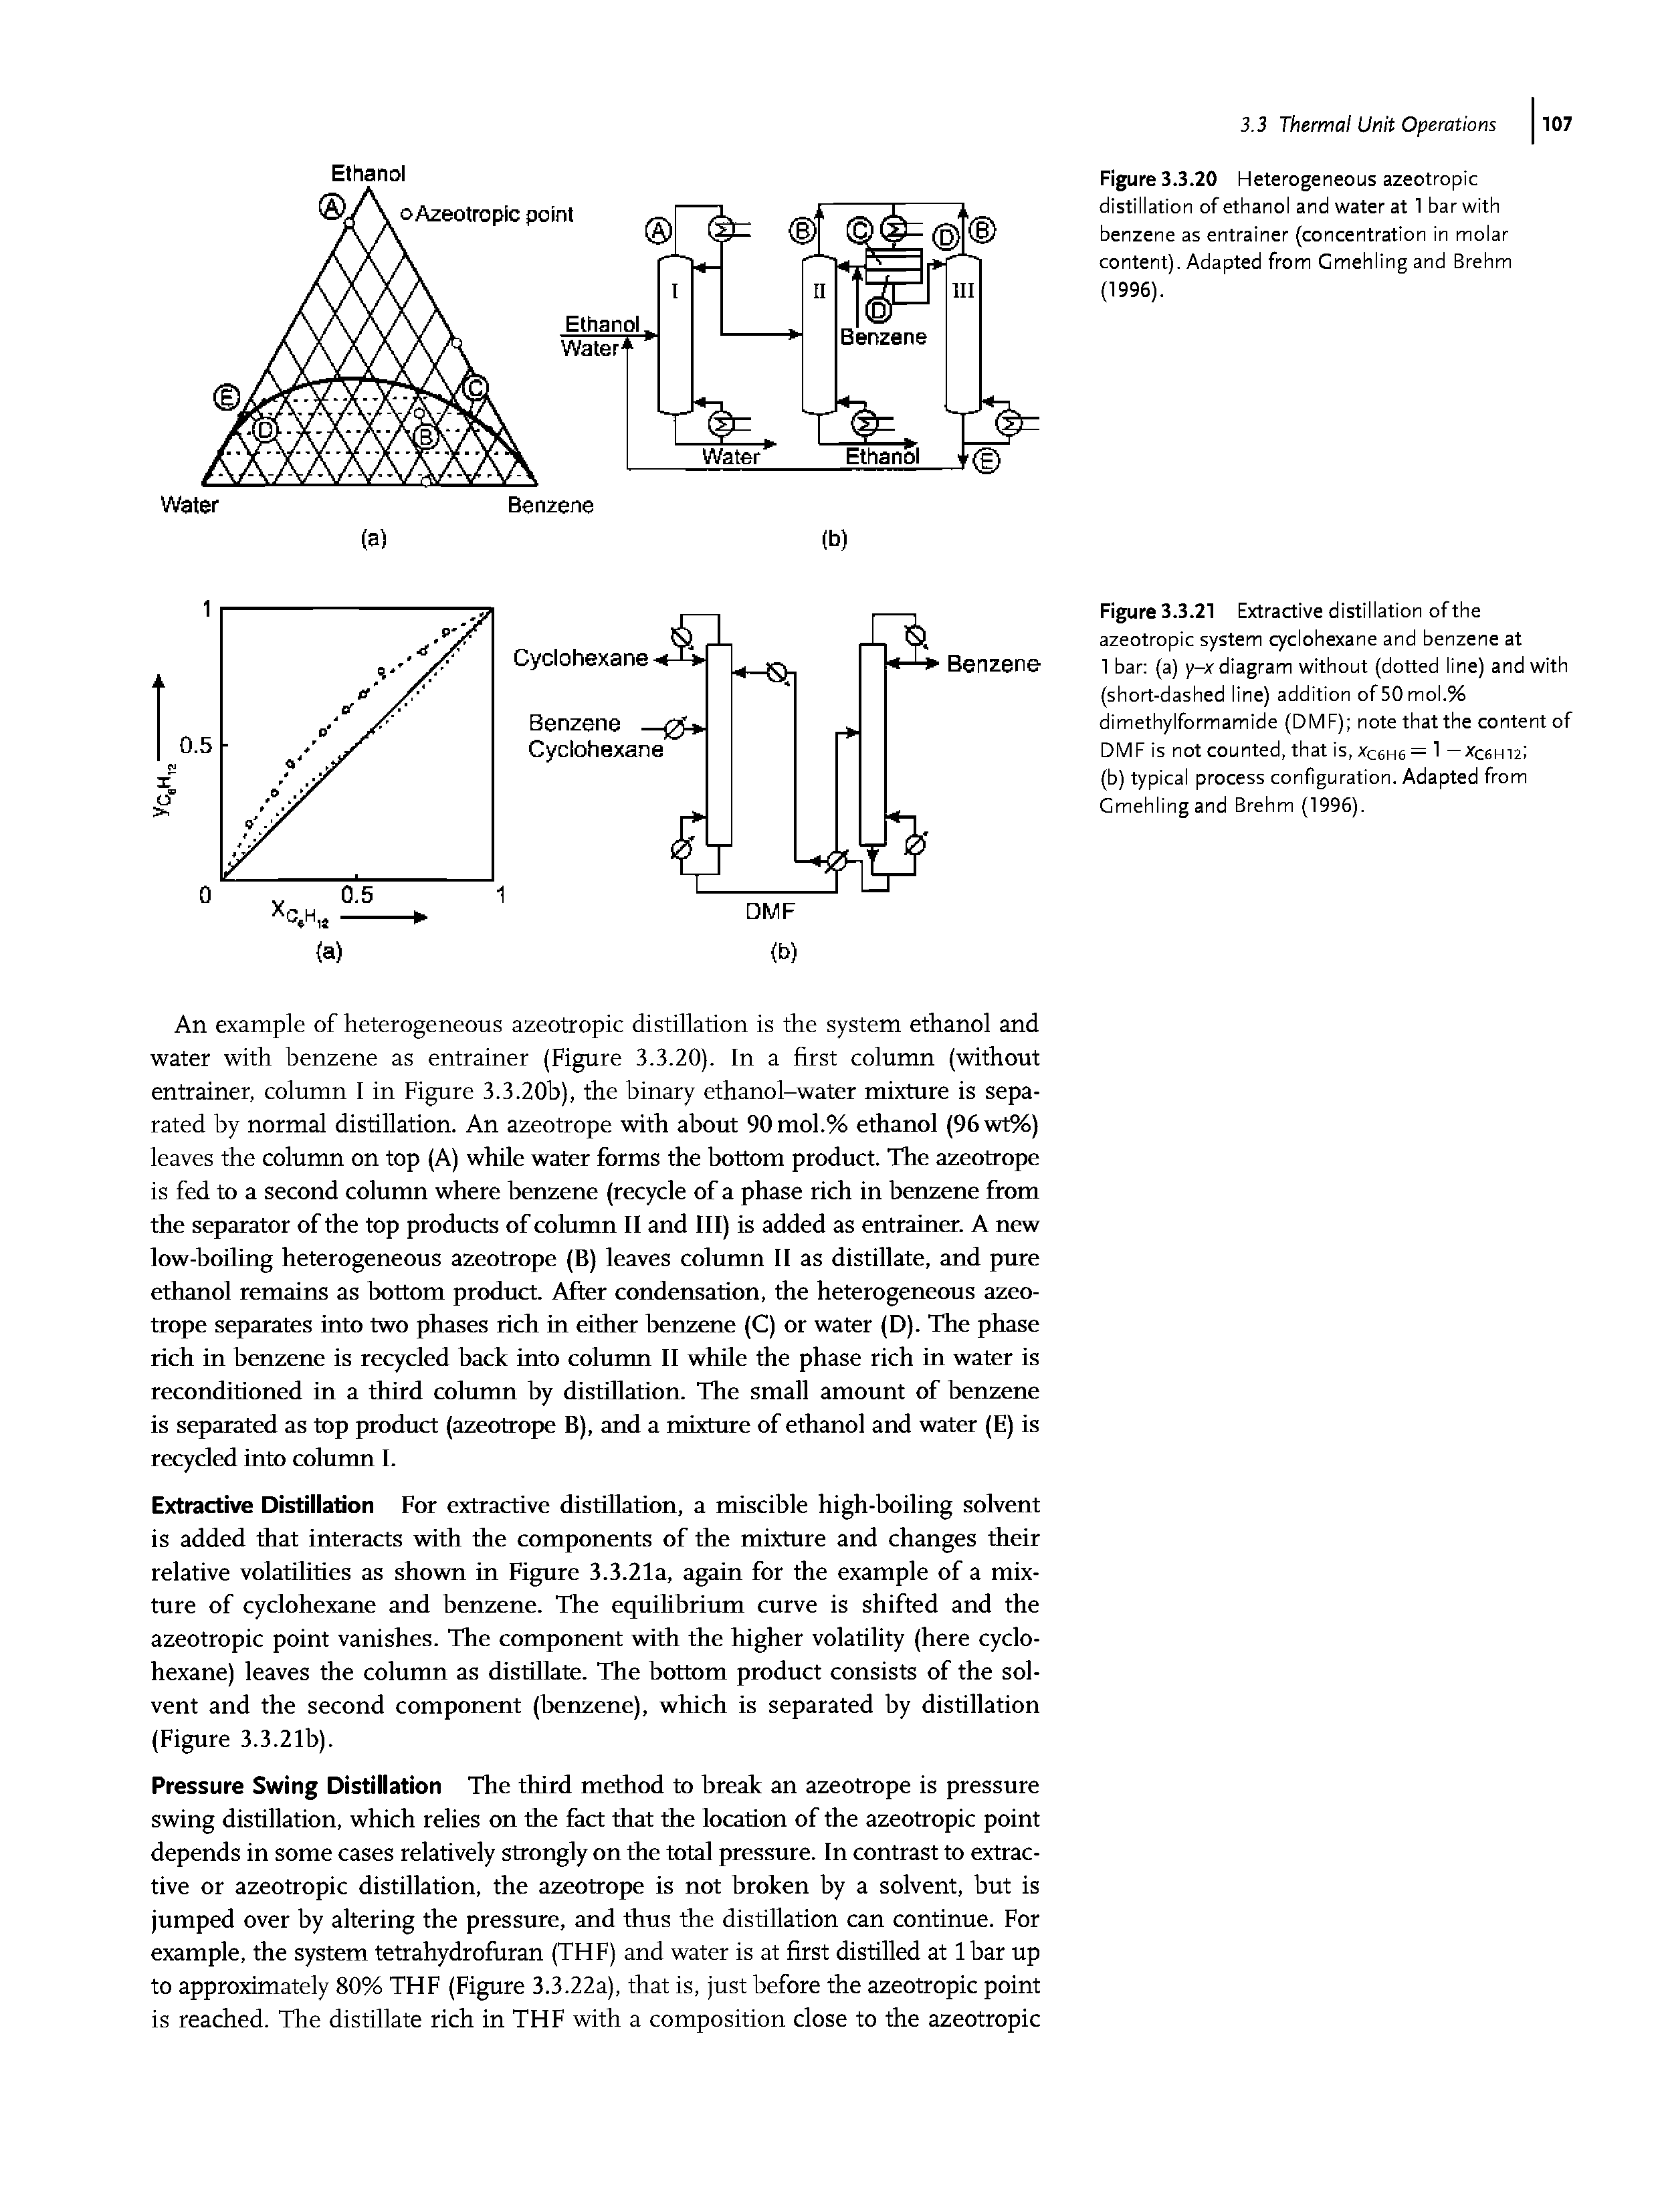 Figure 3.3.21 Extractive distillation of the azeotropic system cyclohexane and benzene at Benzene 1 bar (a) y-x diagram without (dotted line) and with (short-dashed line) addition of50mol.% dimethylformamide (DMF) note that the content of DMF is not counted, that is,xc6H6= 1 —xccHizi (b) typical process configuration. Adapted from Cmehling and Brehm (1996).